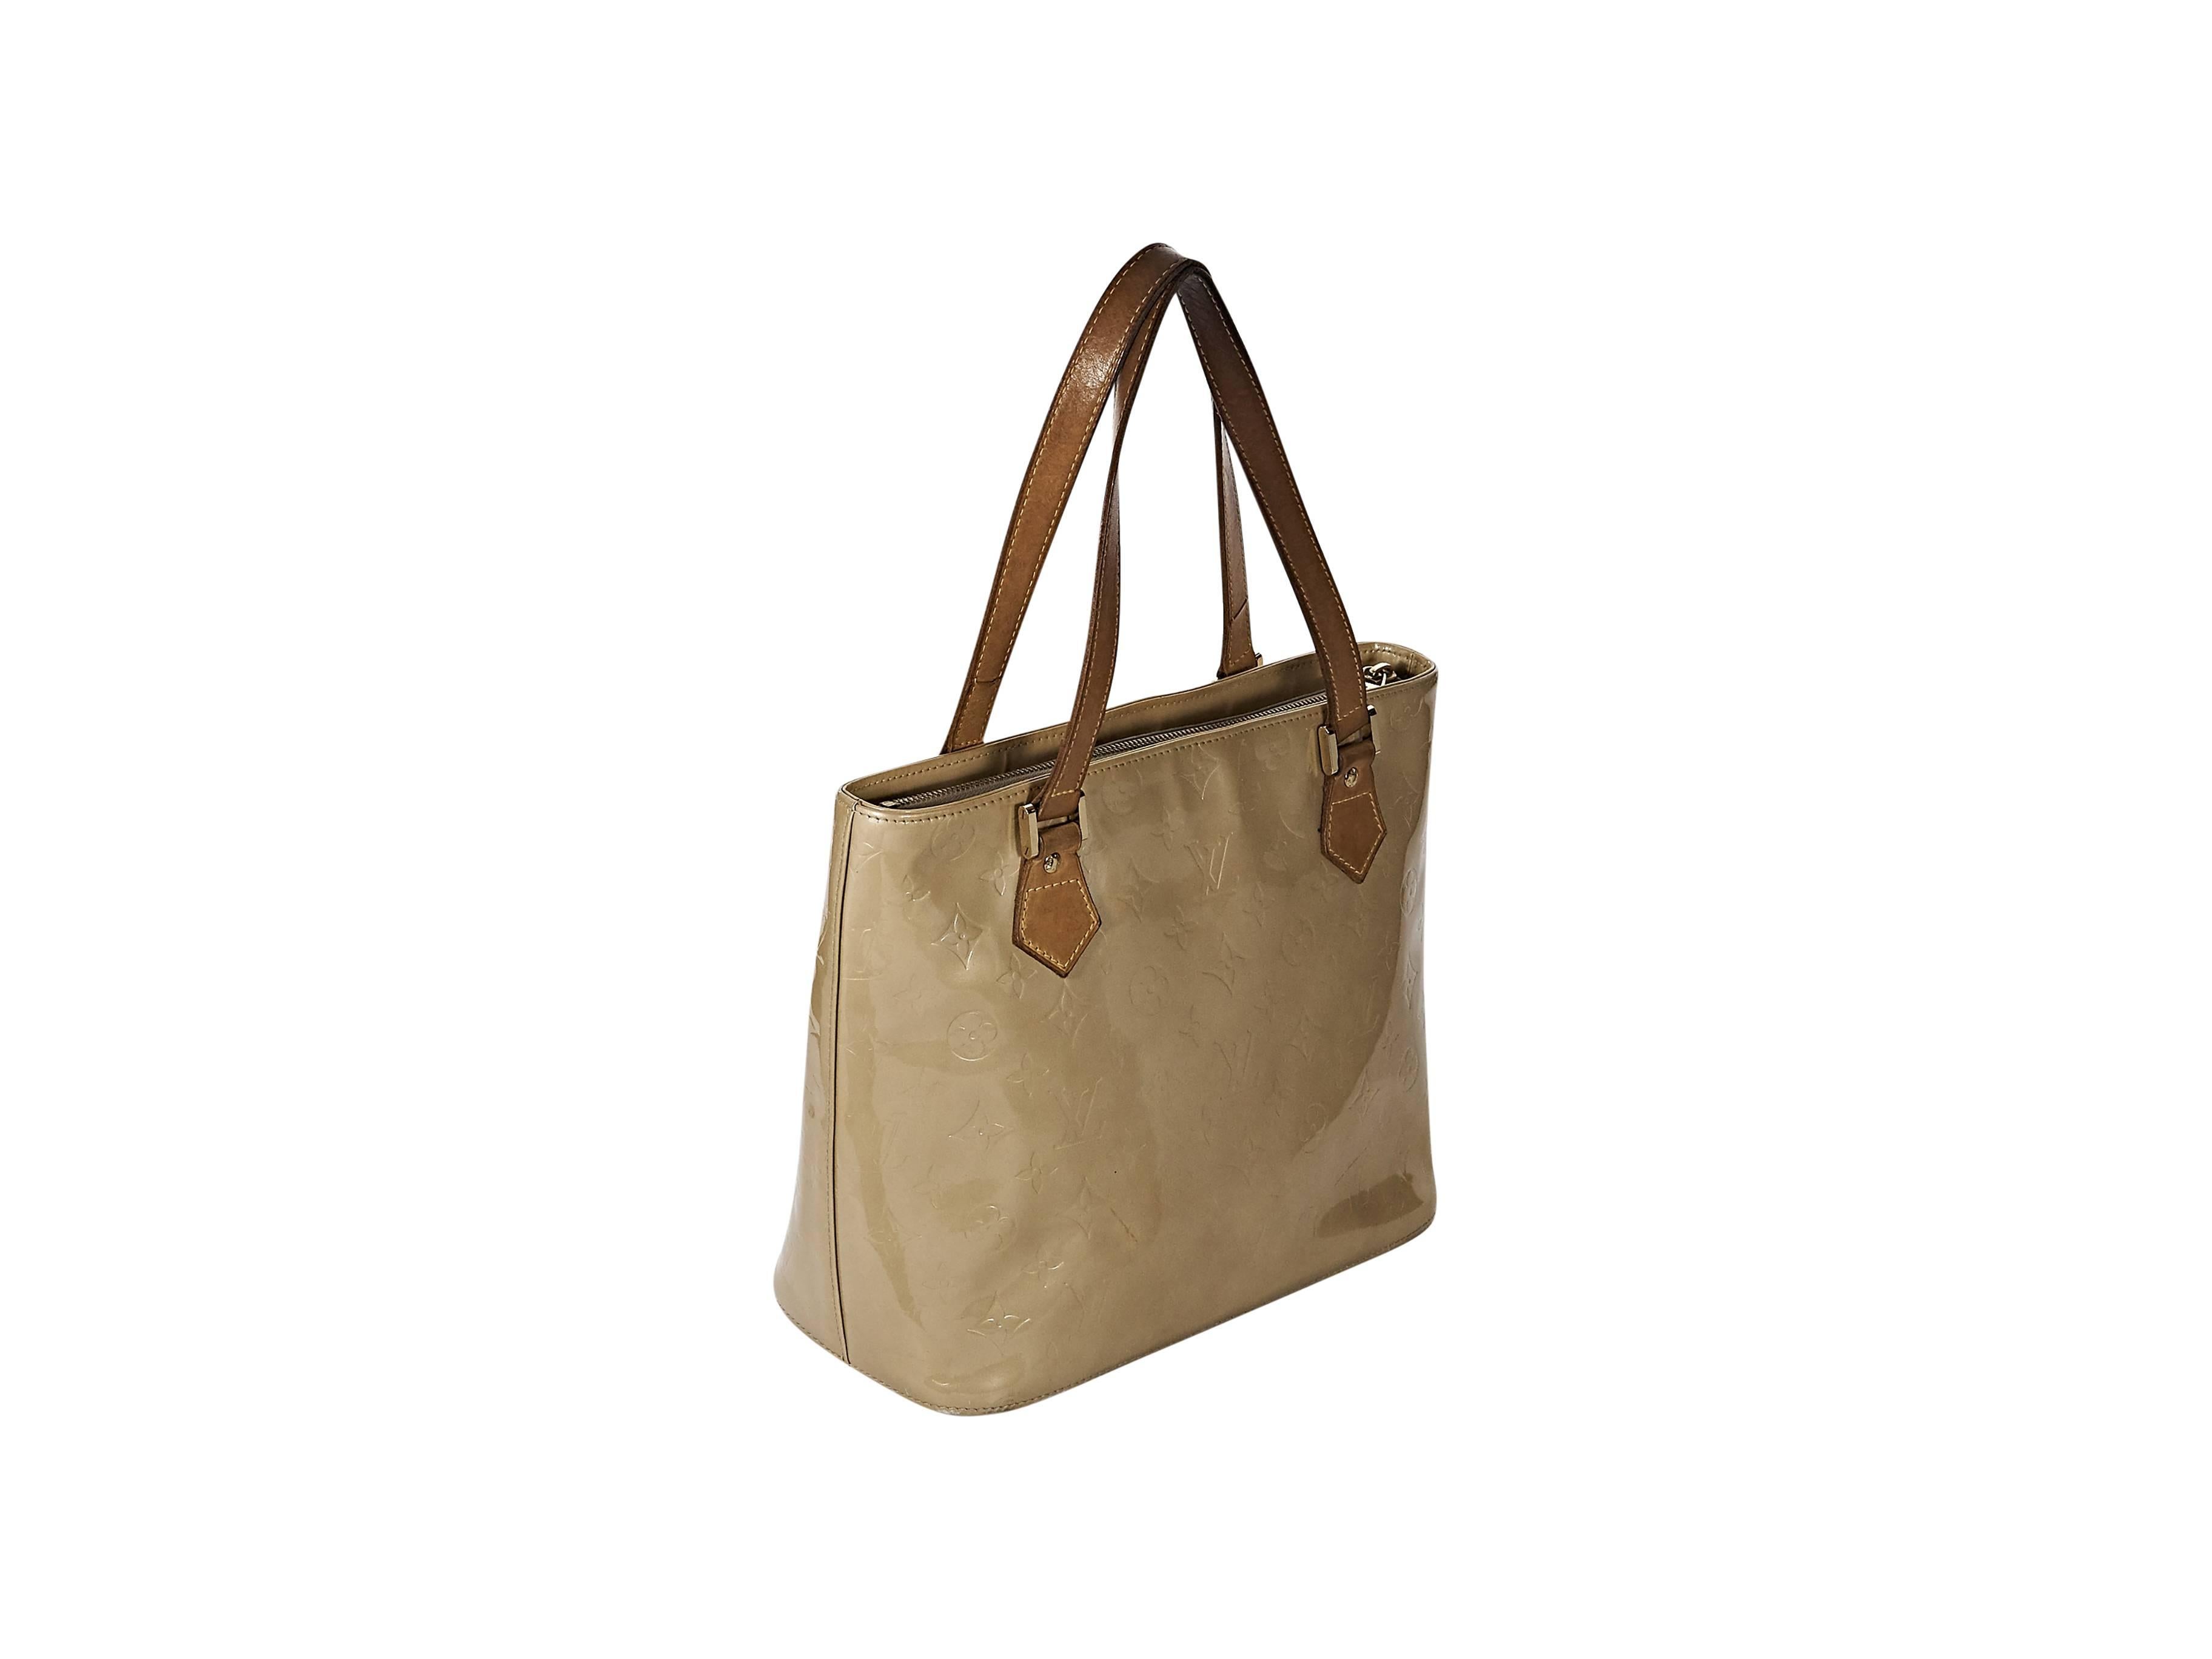 Product details: Beige monogram vernis Houston tote bag by Louis Vuitton. Dual leather shoulder straps. Top zip closure. Leather lined interior with inner zip pocket. Flat bottom. Dust bag included. 11